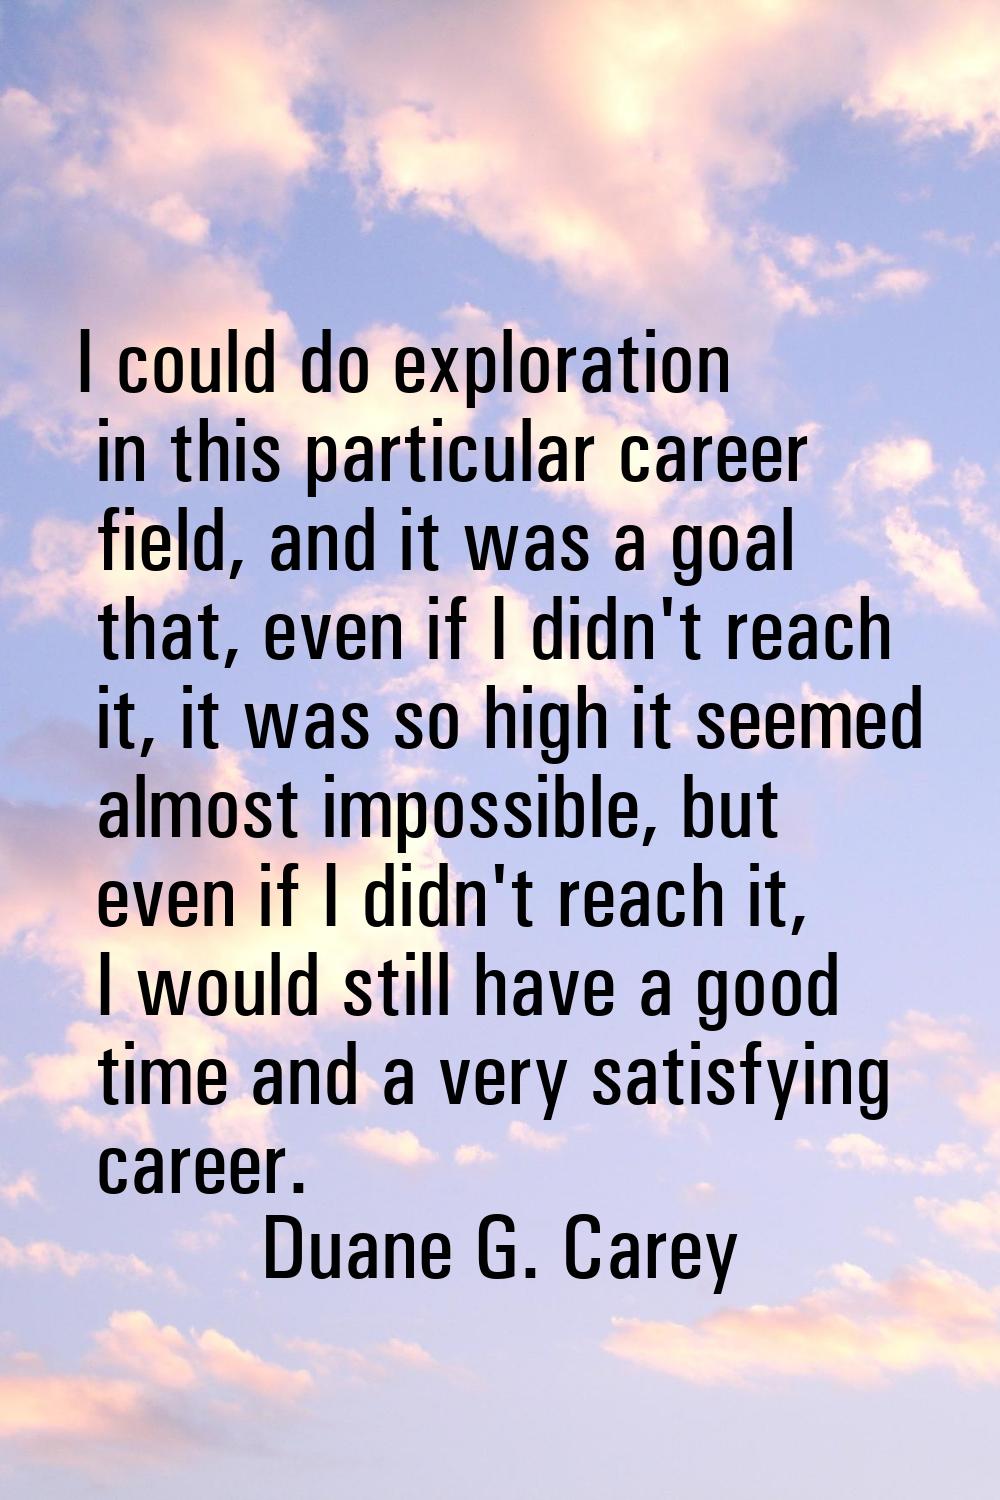 I could do exploration in this particular career field, and it was a goal that, even if I didn't re